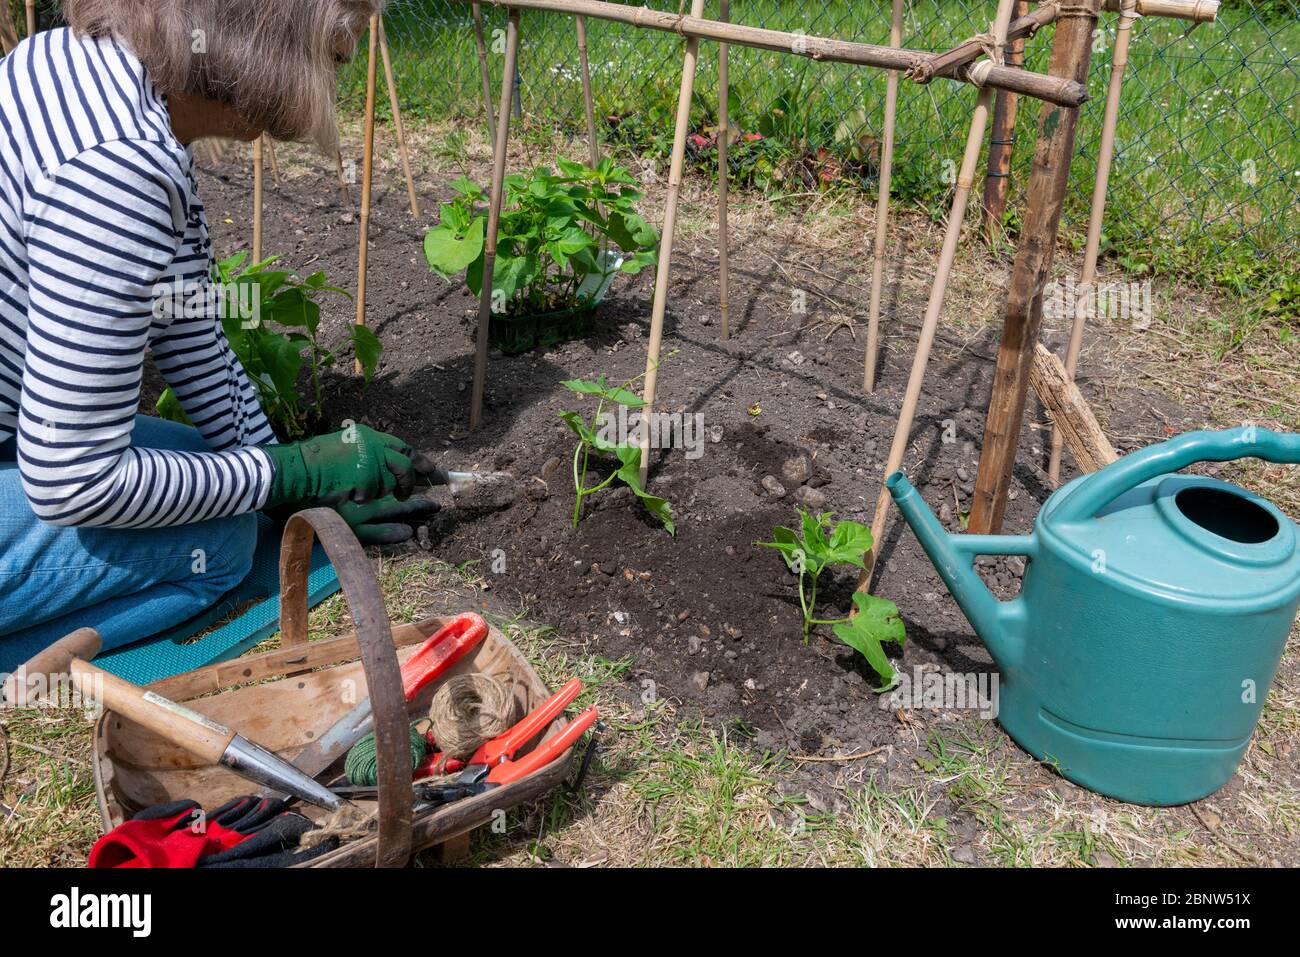 Reading UK 16 May After English garden centres opened last  Wednesday, together with lifting of restrictions on lockdown, it's now given gardeners ,a chance to buy and plant out runner beans.(In the UK, there are around 27 million people who partake in gardening)Credit Gary Blake/Alamy Live News Stock Photo